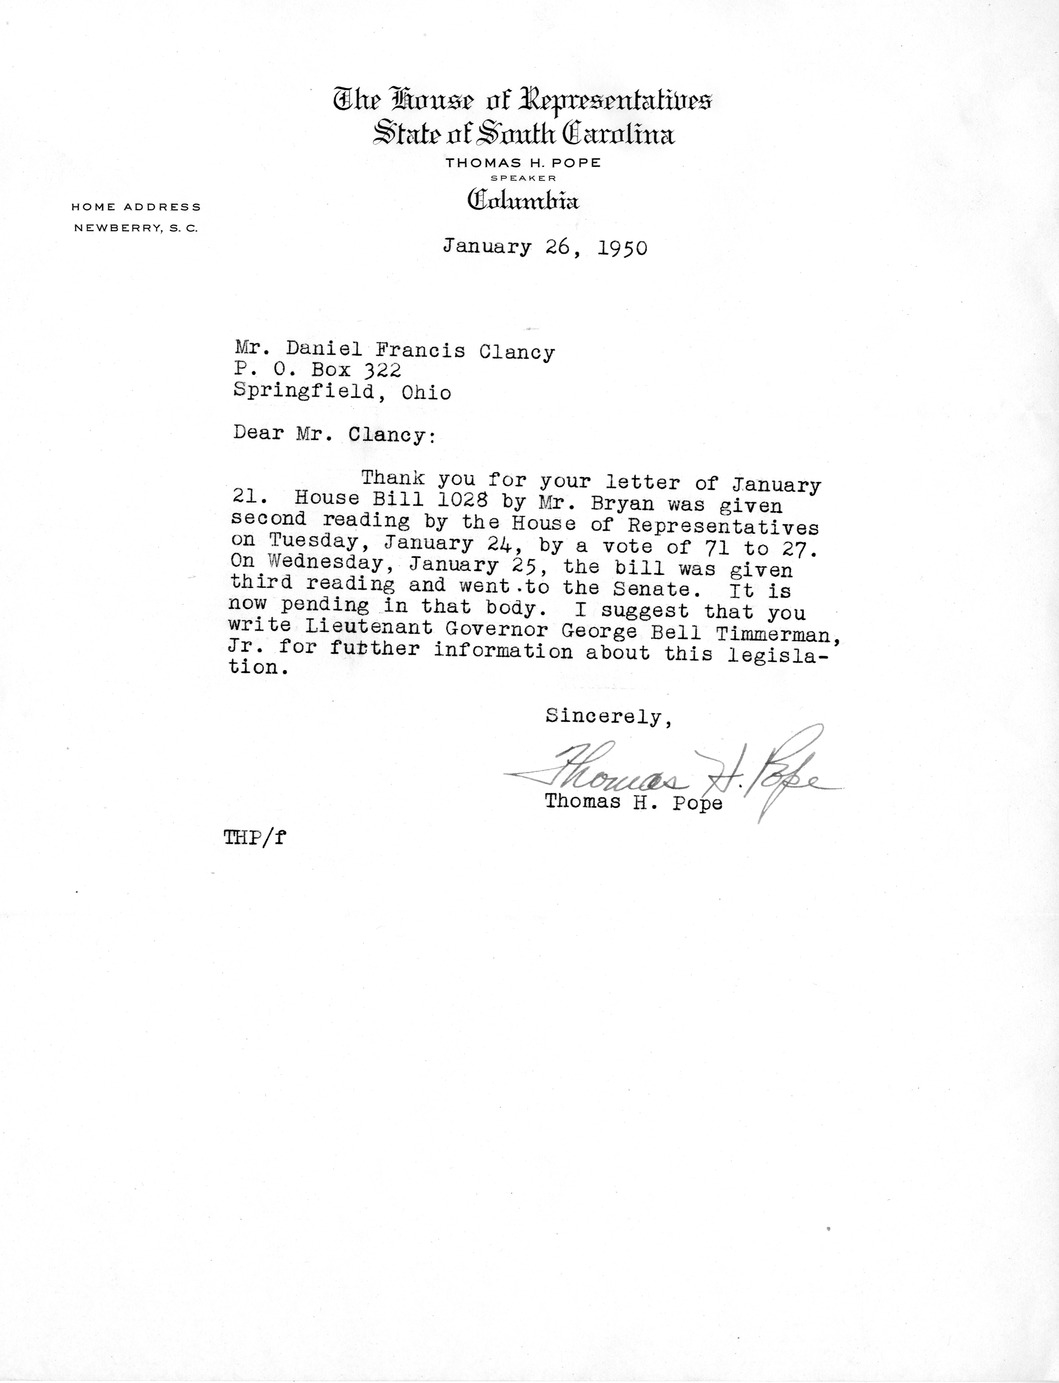 Letter from Thomas H. Pope to Daniel F. Clancy